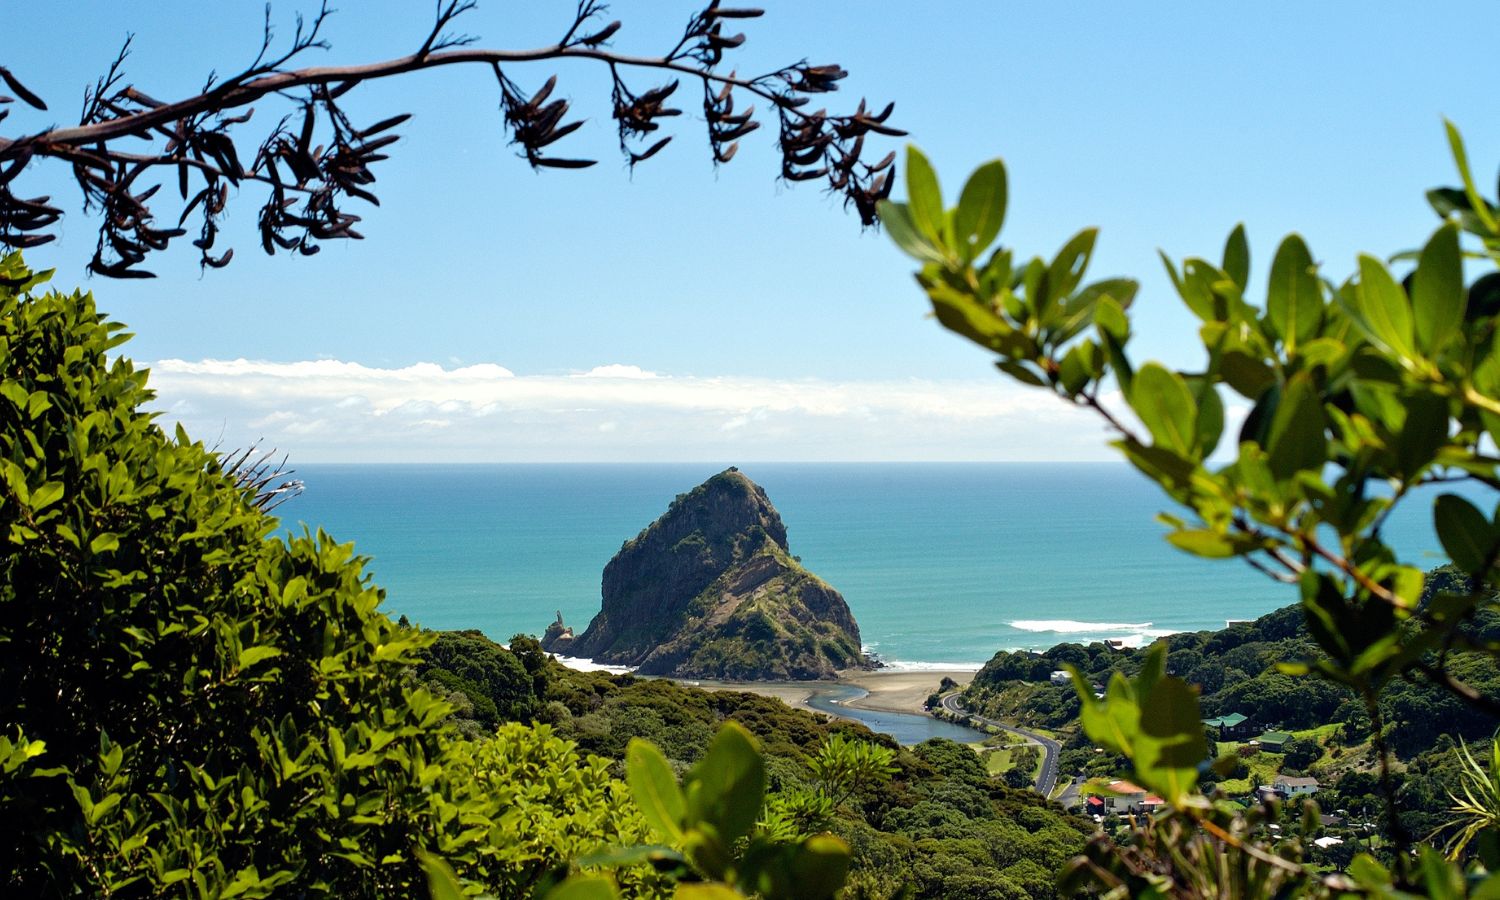 Our Flag Means Death filming locations: Piha Beach